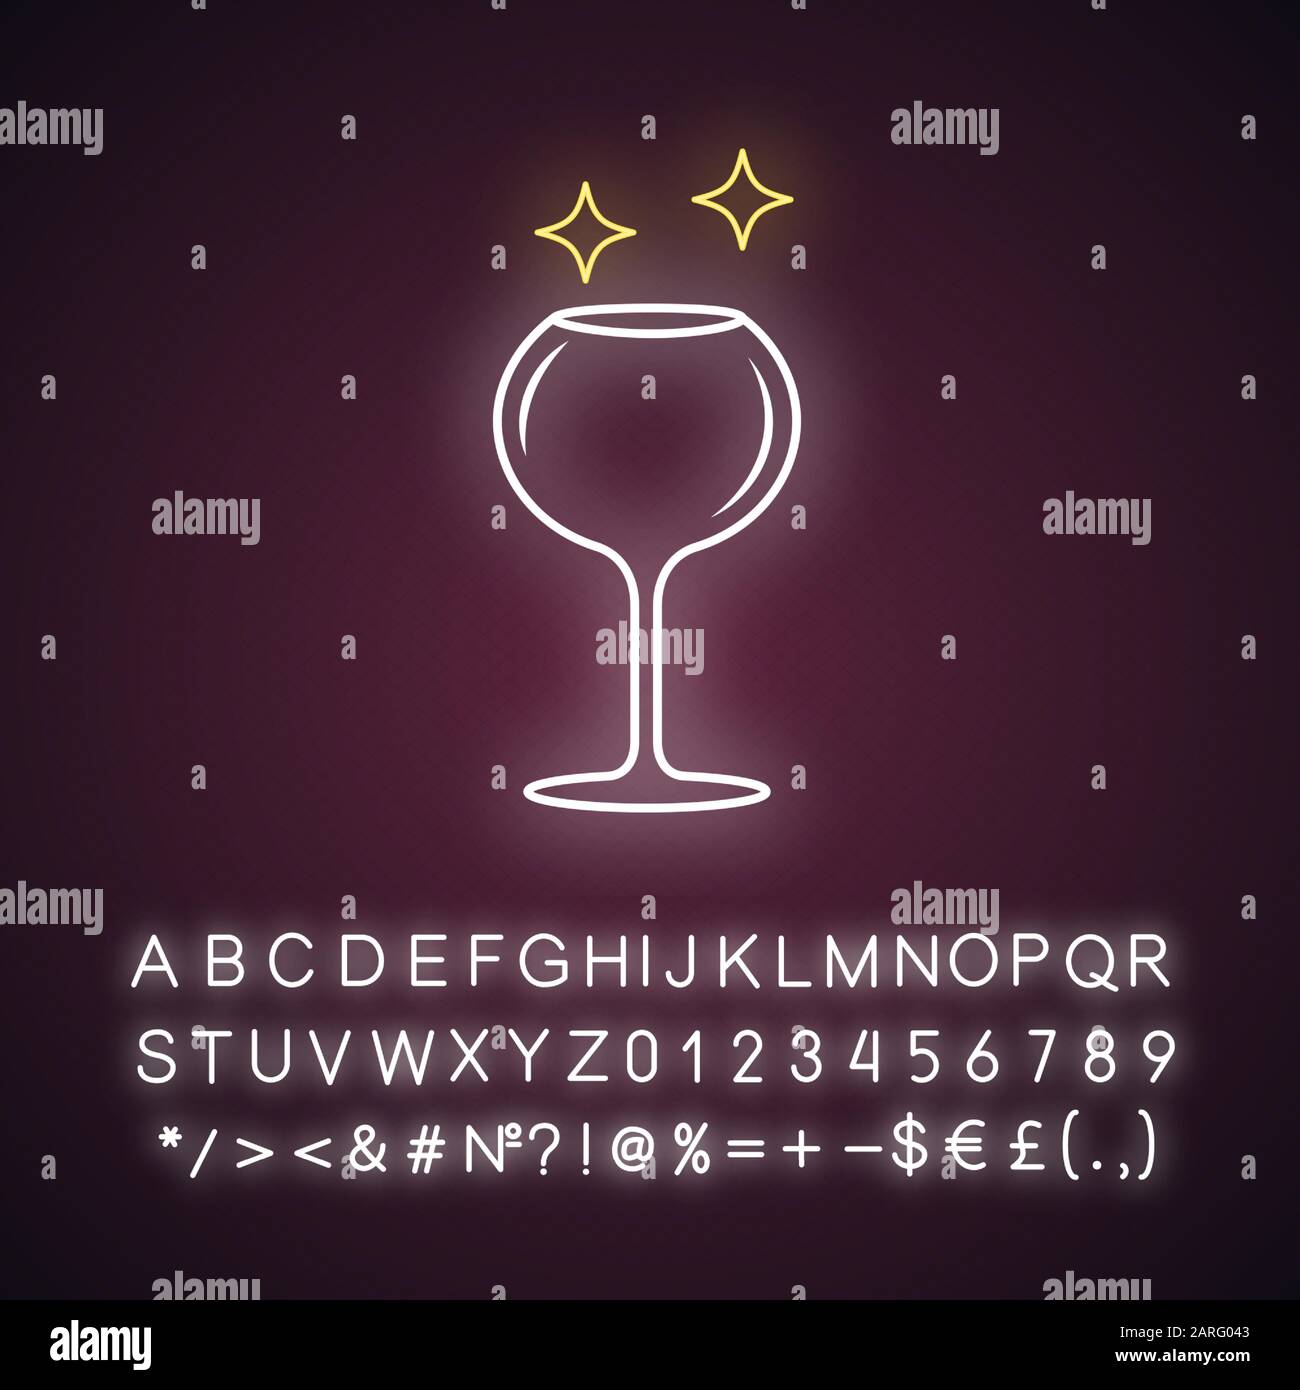 https://c8.alamy.com/comp/2ARG043/alsace-wine-glass-neon-light-icon-crystal-glassware-shapes-types-glass-for-white-wine-other-drinks-alcohol-drinking-glowing-sign-with-alphabet-2ARG043.jpg